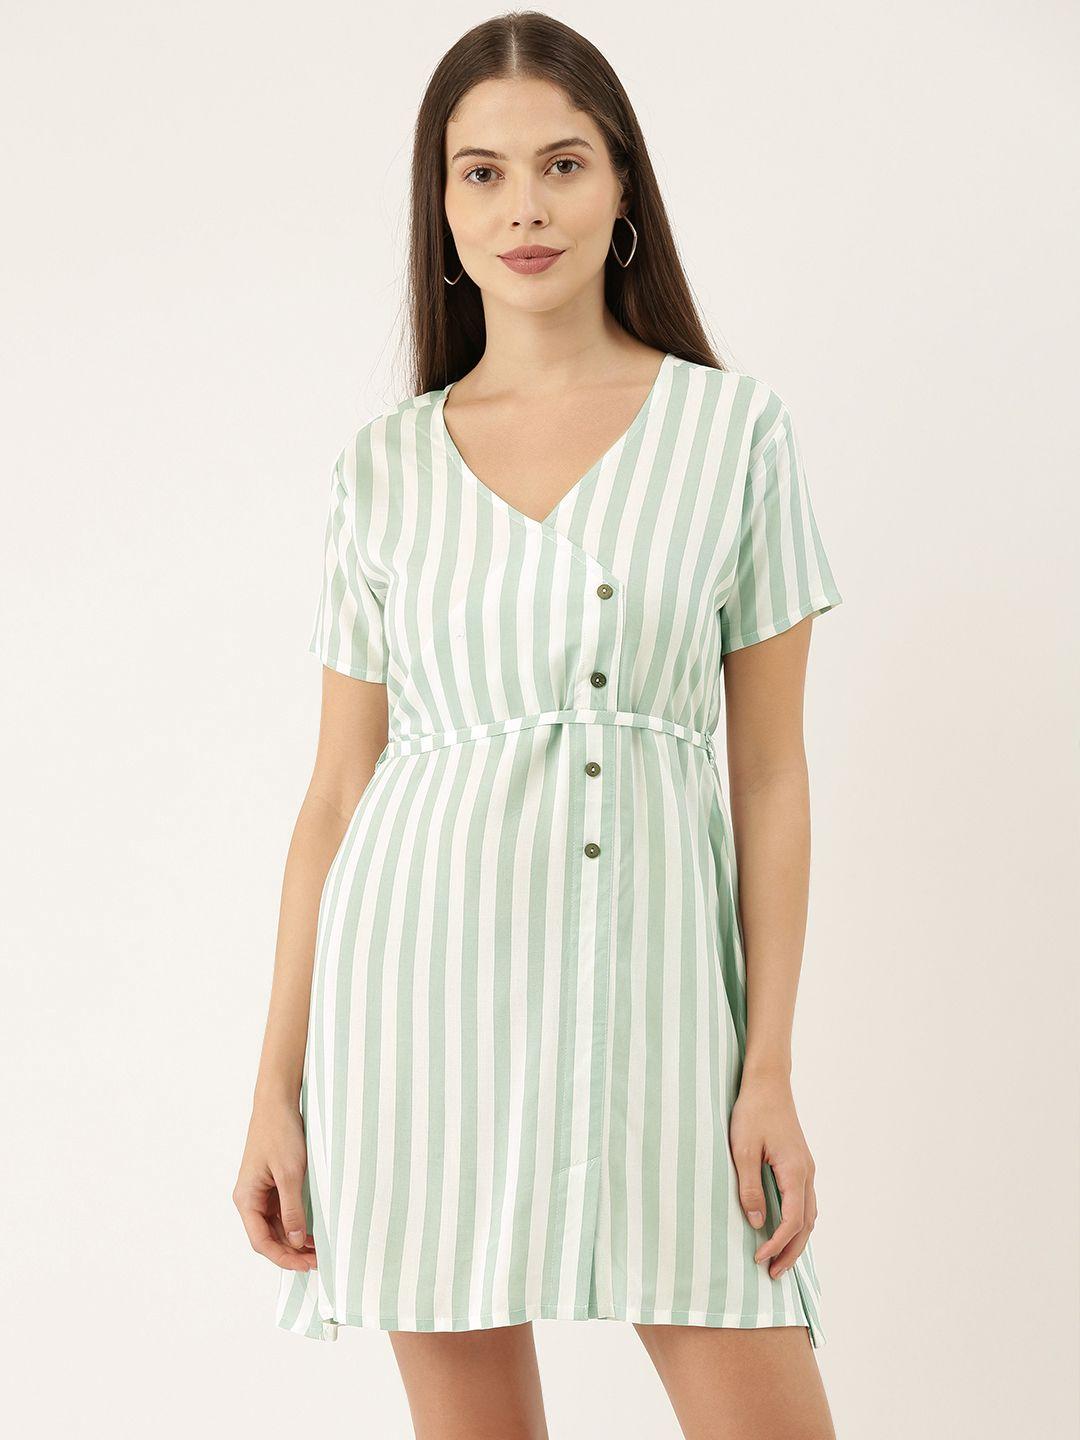 the dry state women white striped a-line dress with tie-up detailing